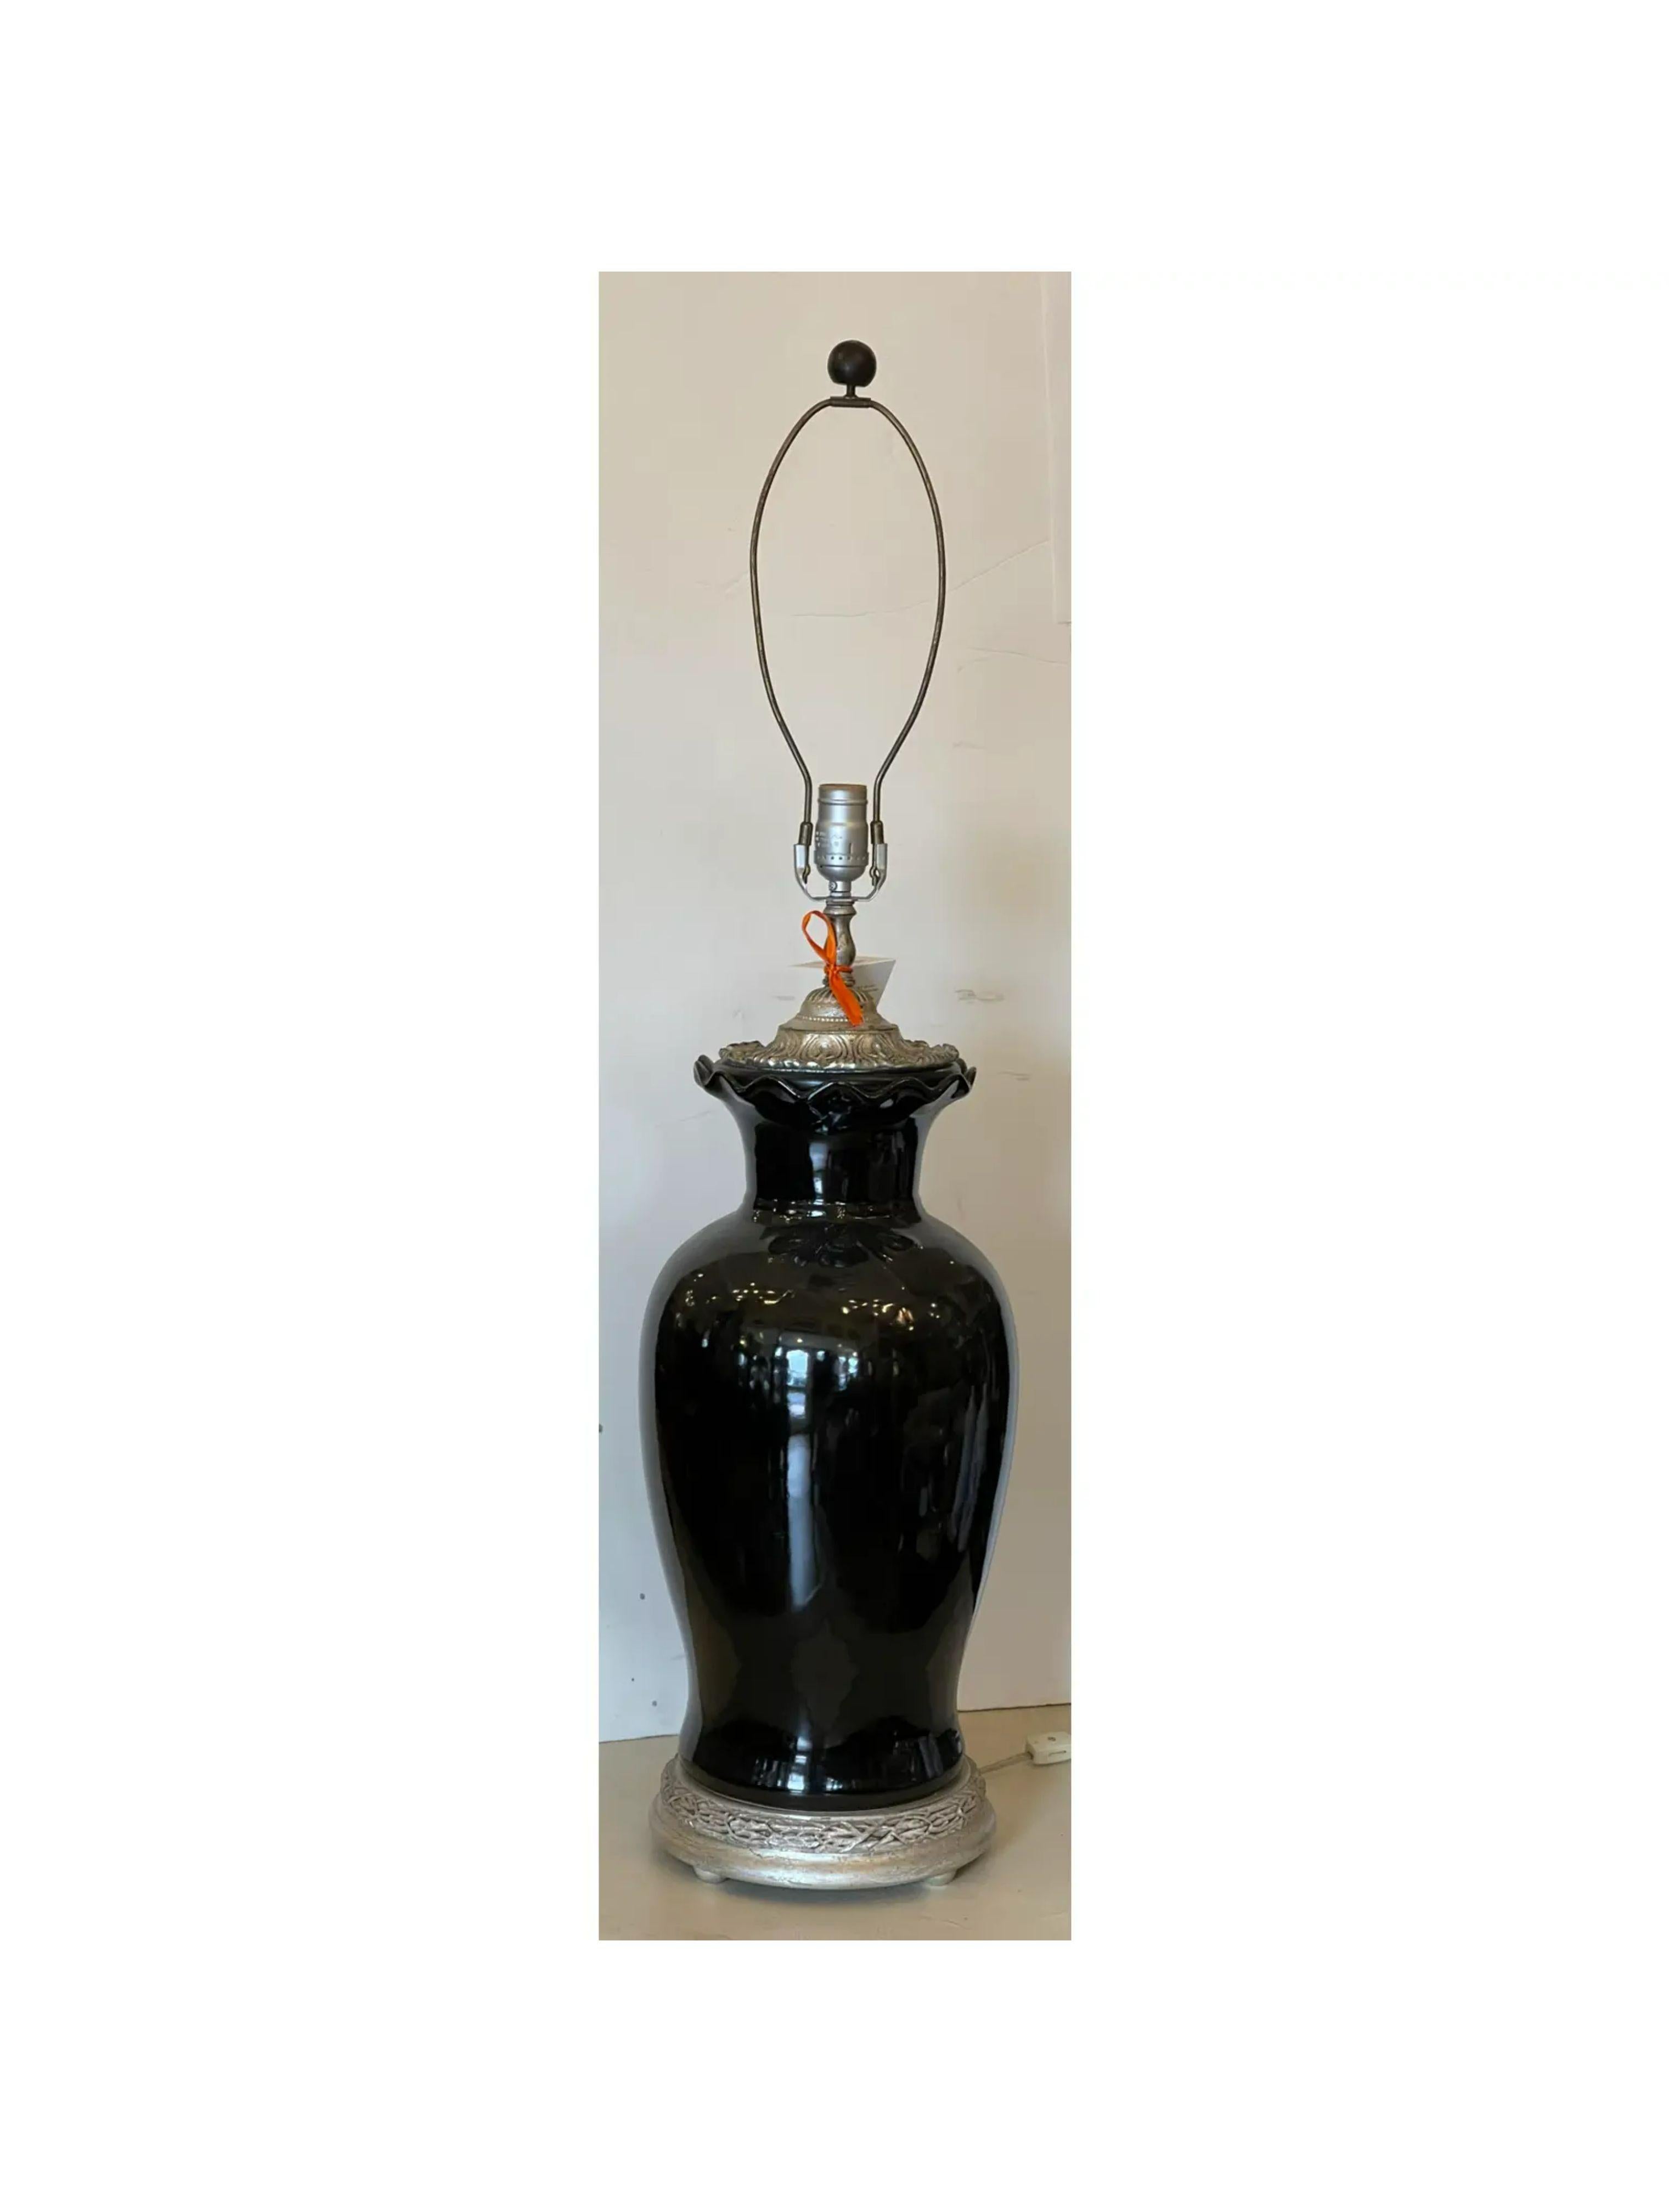 Huge Black Chinese Pottery Vase Now a Designer Table Lamp

Additional information: 
Materials: Pottery
Color: Black
Designer: Randy Esada Designs for Prospr
Period: 2000 - 2009
Styles: Chinese
Lamp Shade: Not Included
Item Type: Vintage, Antique or